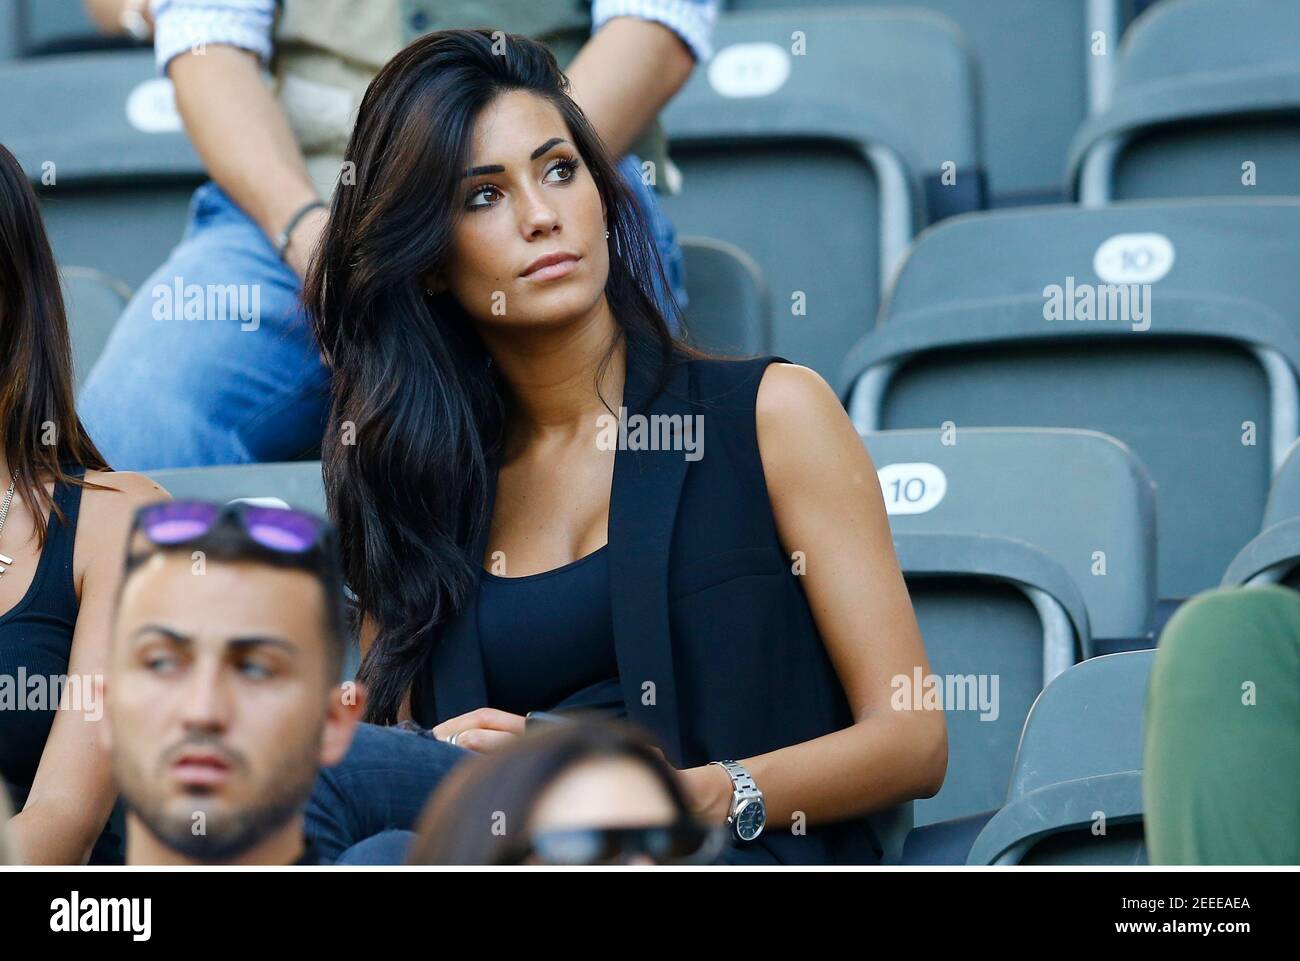 Federica Nargi And Alessandro Matri High Resolution Stock Photography and  Images - Alamy